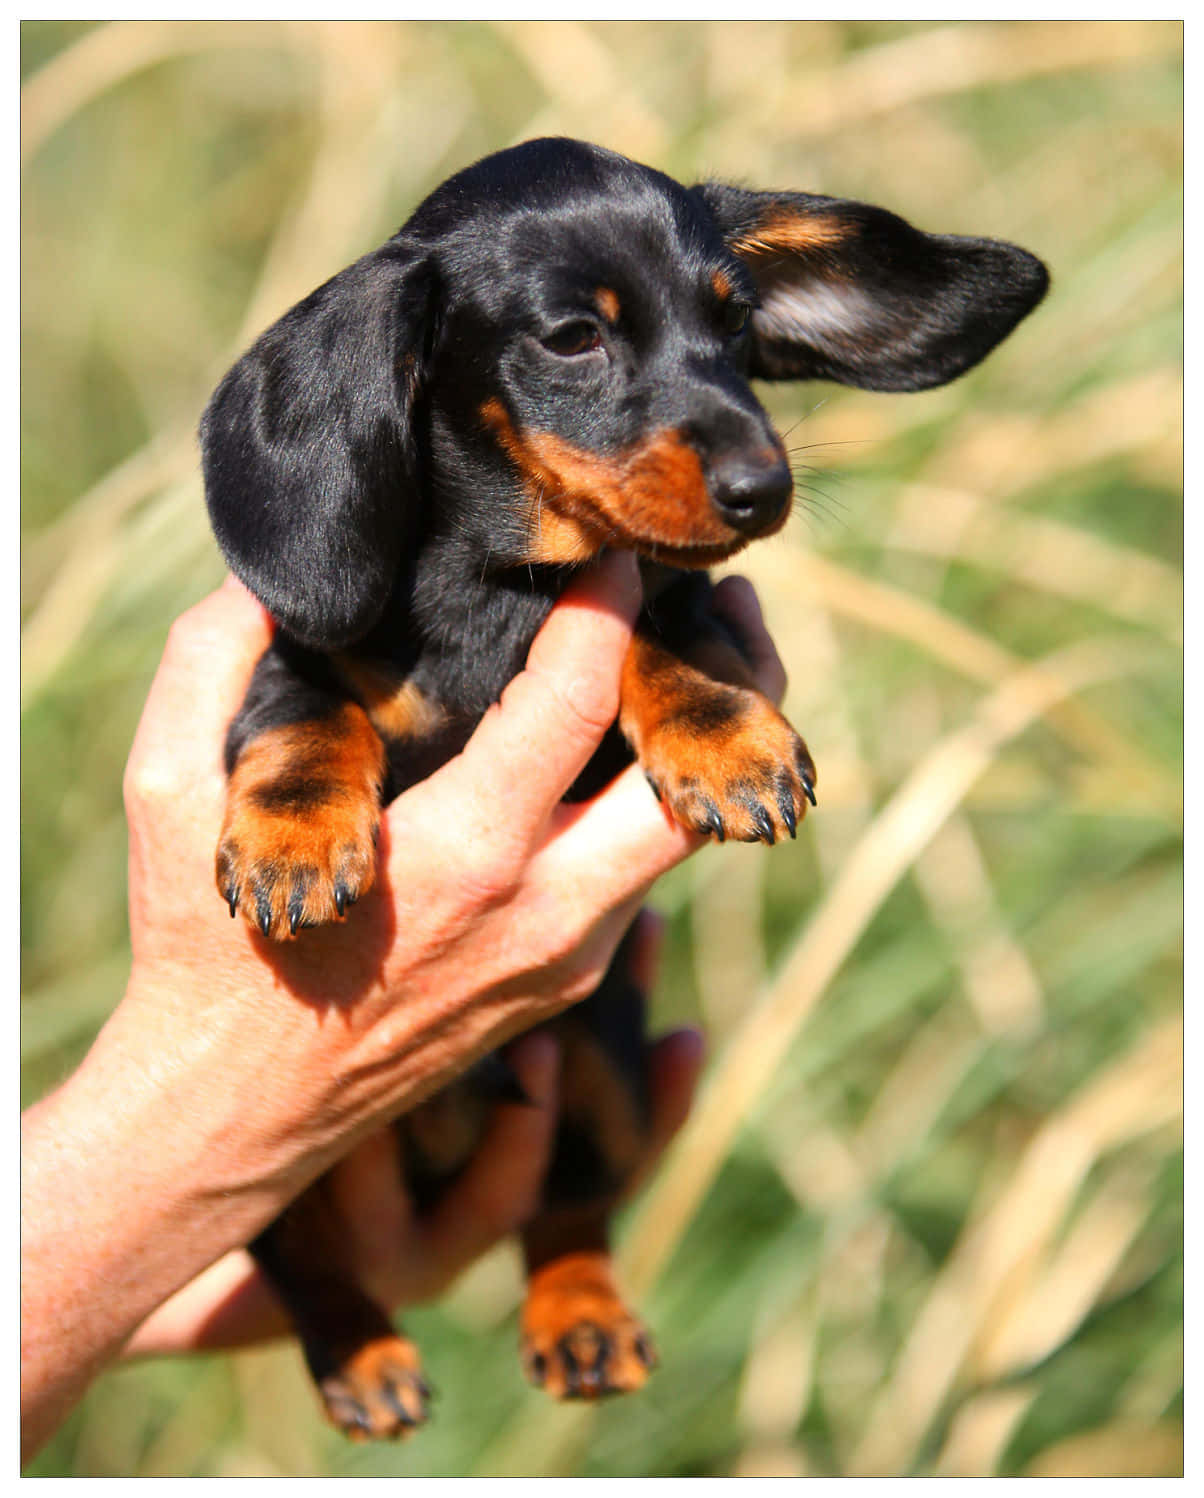 Adorable little Dachshund puppy ready for puppies and cuddles!